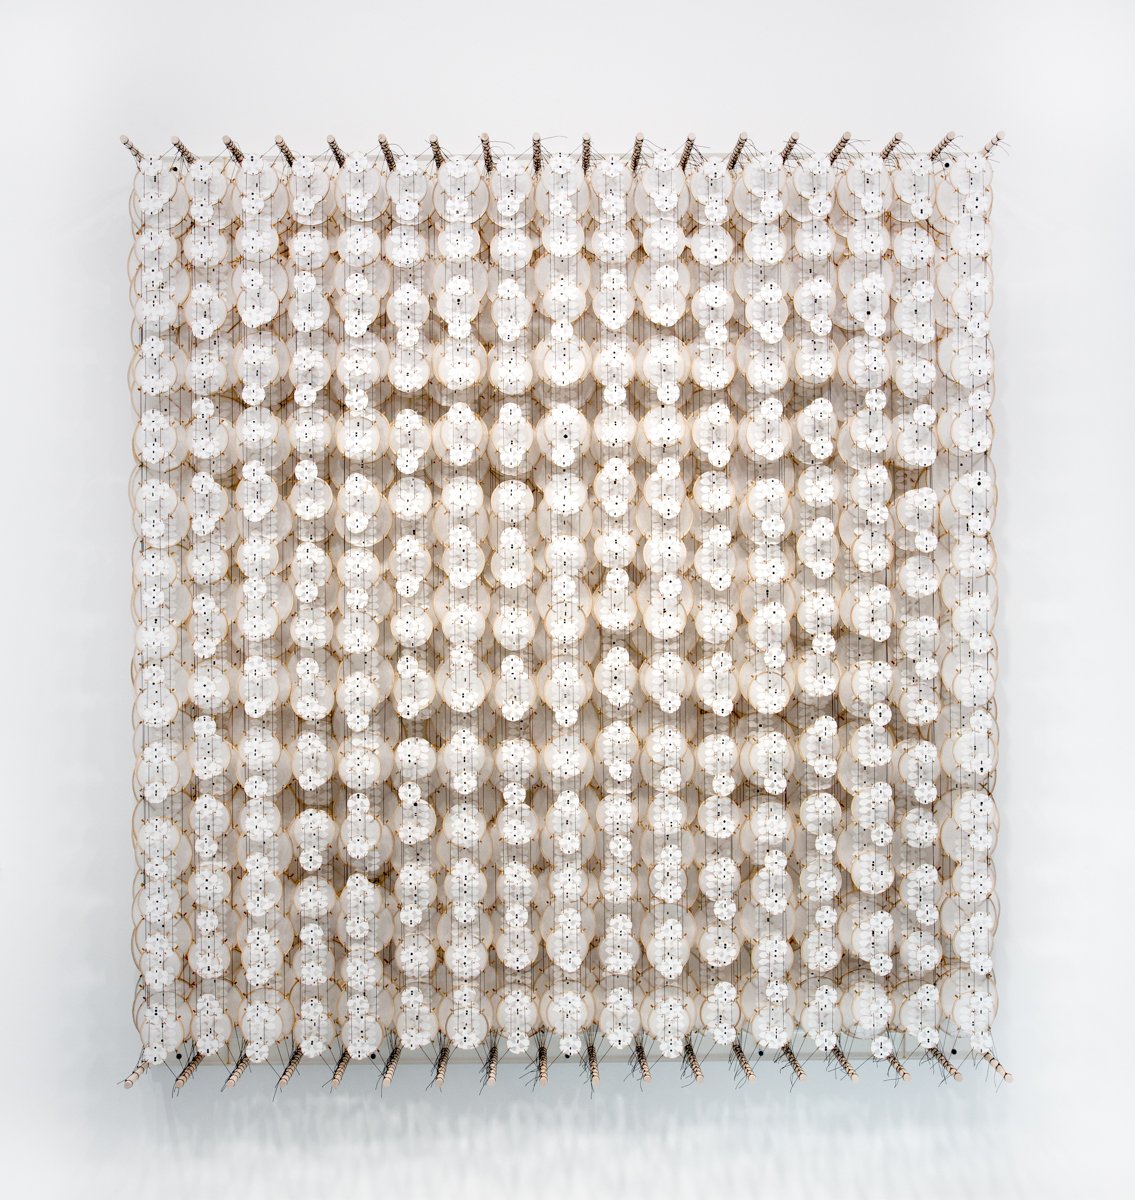 Jacob Hashimoto, In this time and place, 2021, bamboo, acrylic, paper, wood and Dacron, 65 7:8 x 60 7:8 x 8 1:4 in (JHa302274)_A